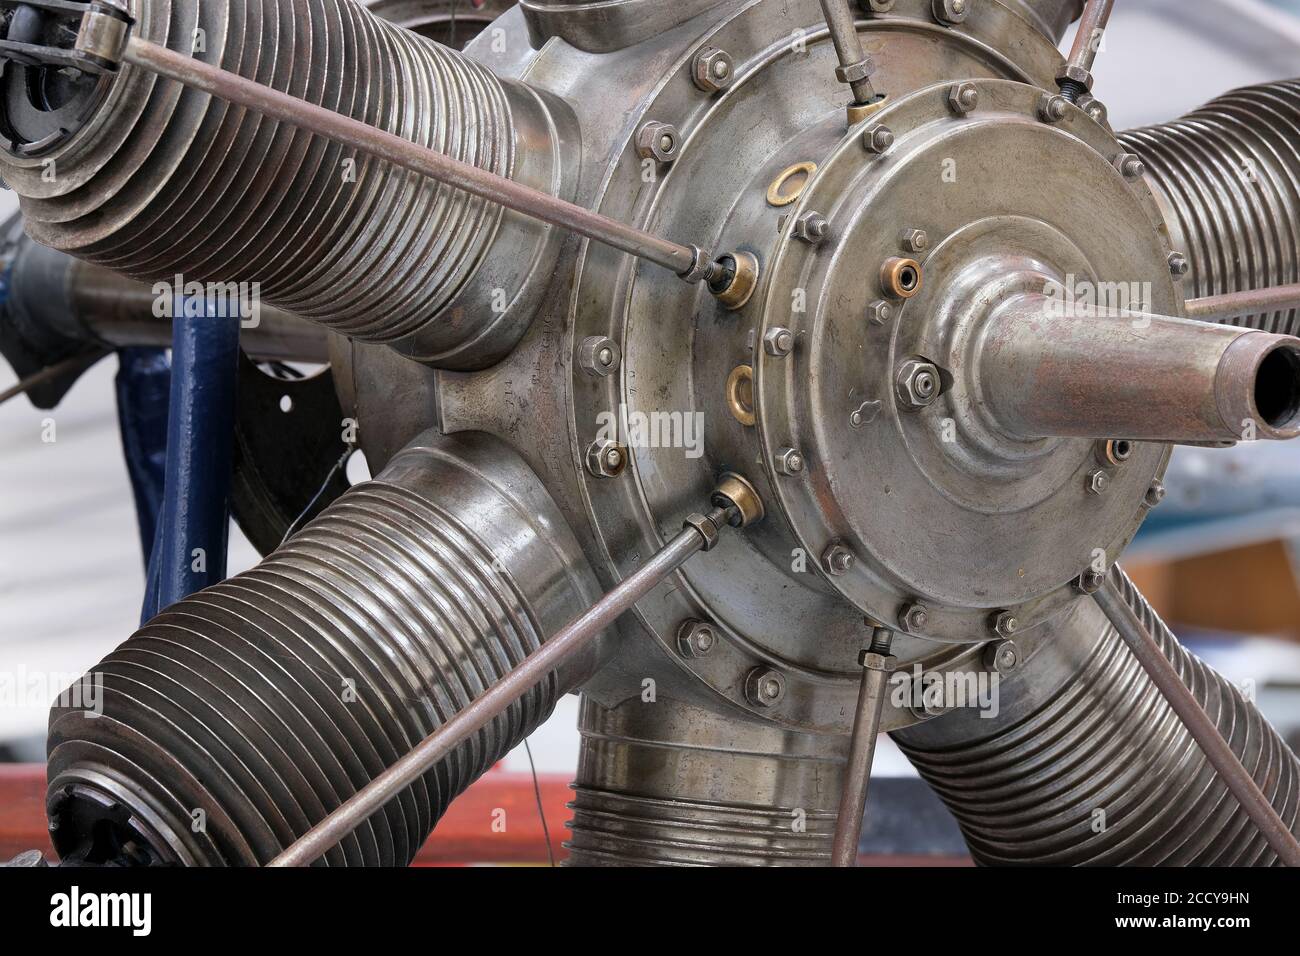 detail of cylinders and external valves on early aircraft engines. Stock Photo